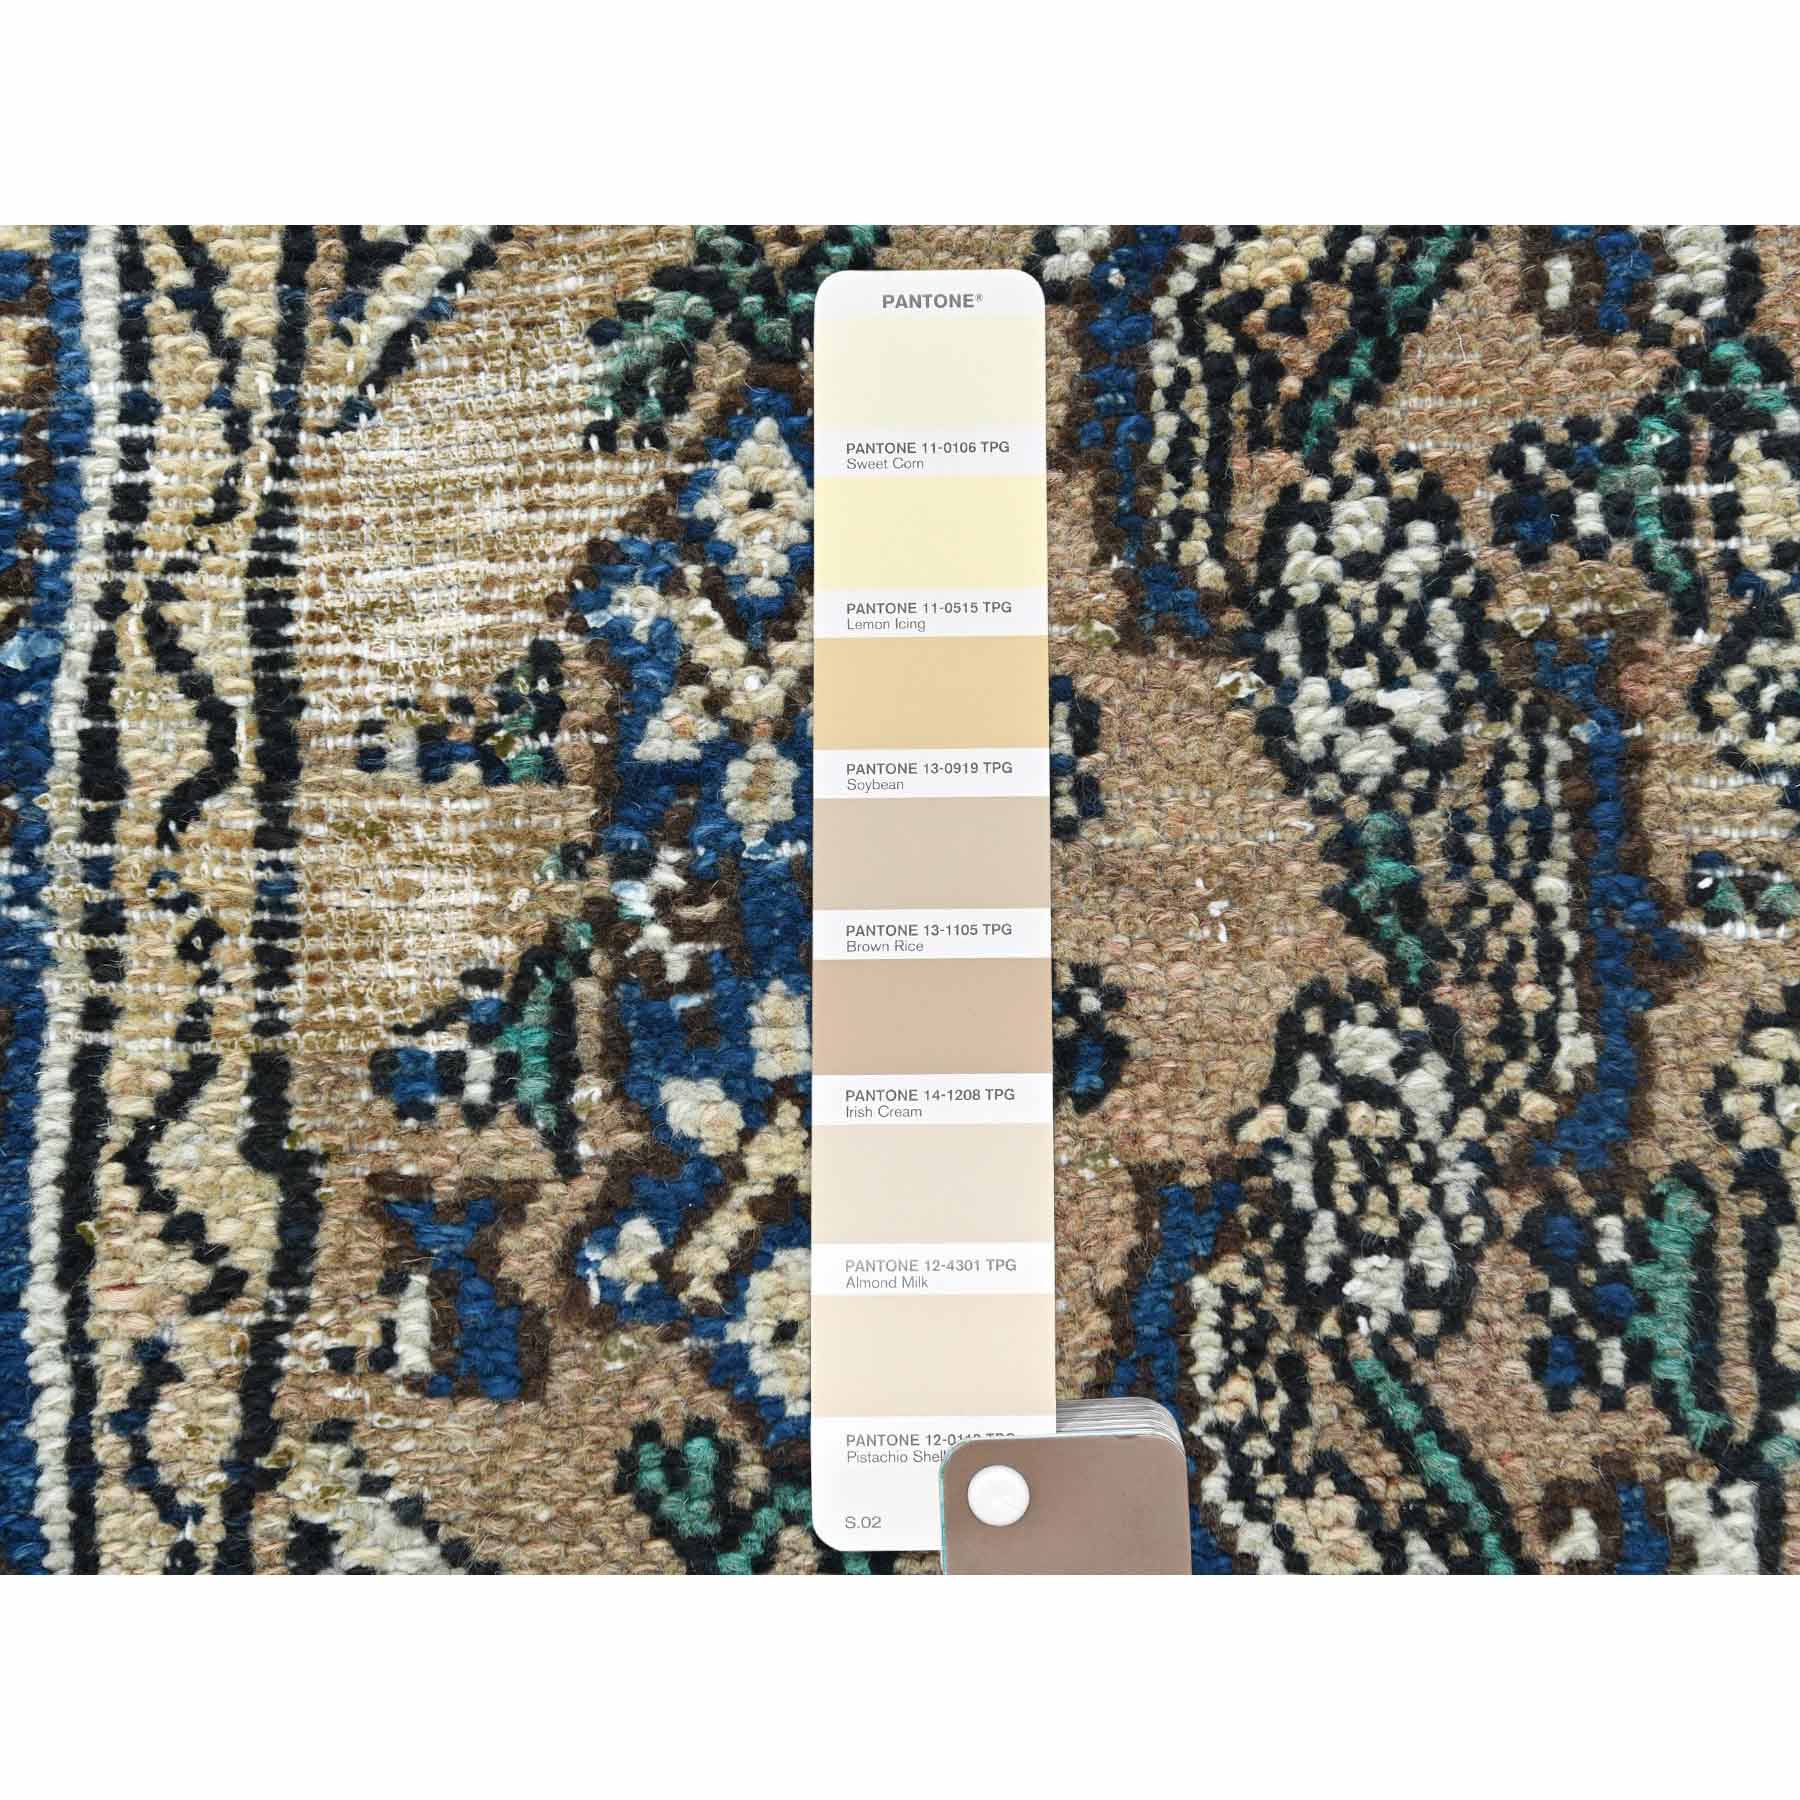 Overdyed-Vintage-Hand-Knotted-Rug-405970